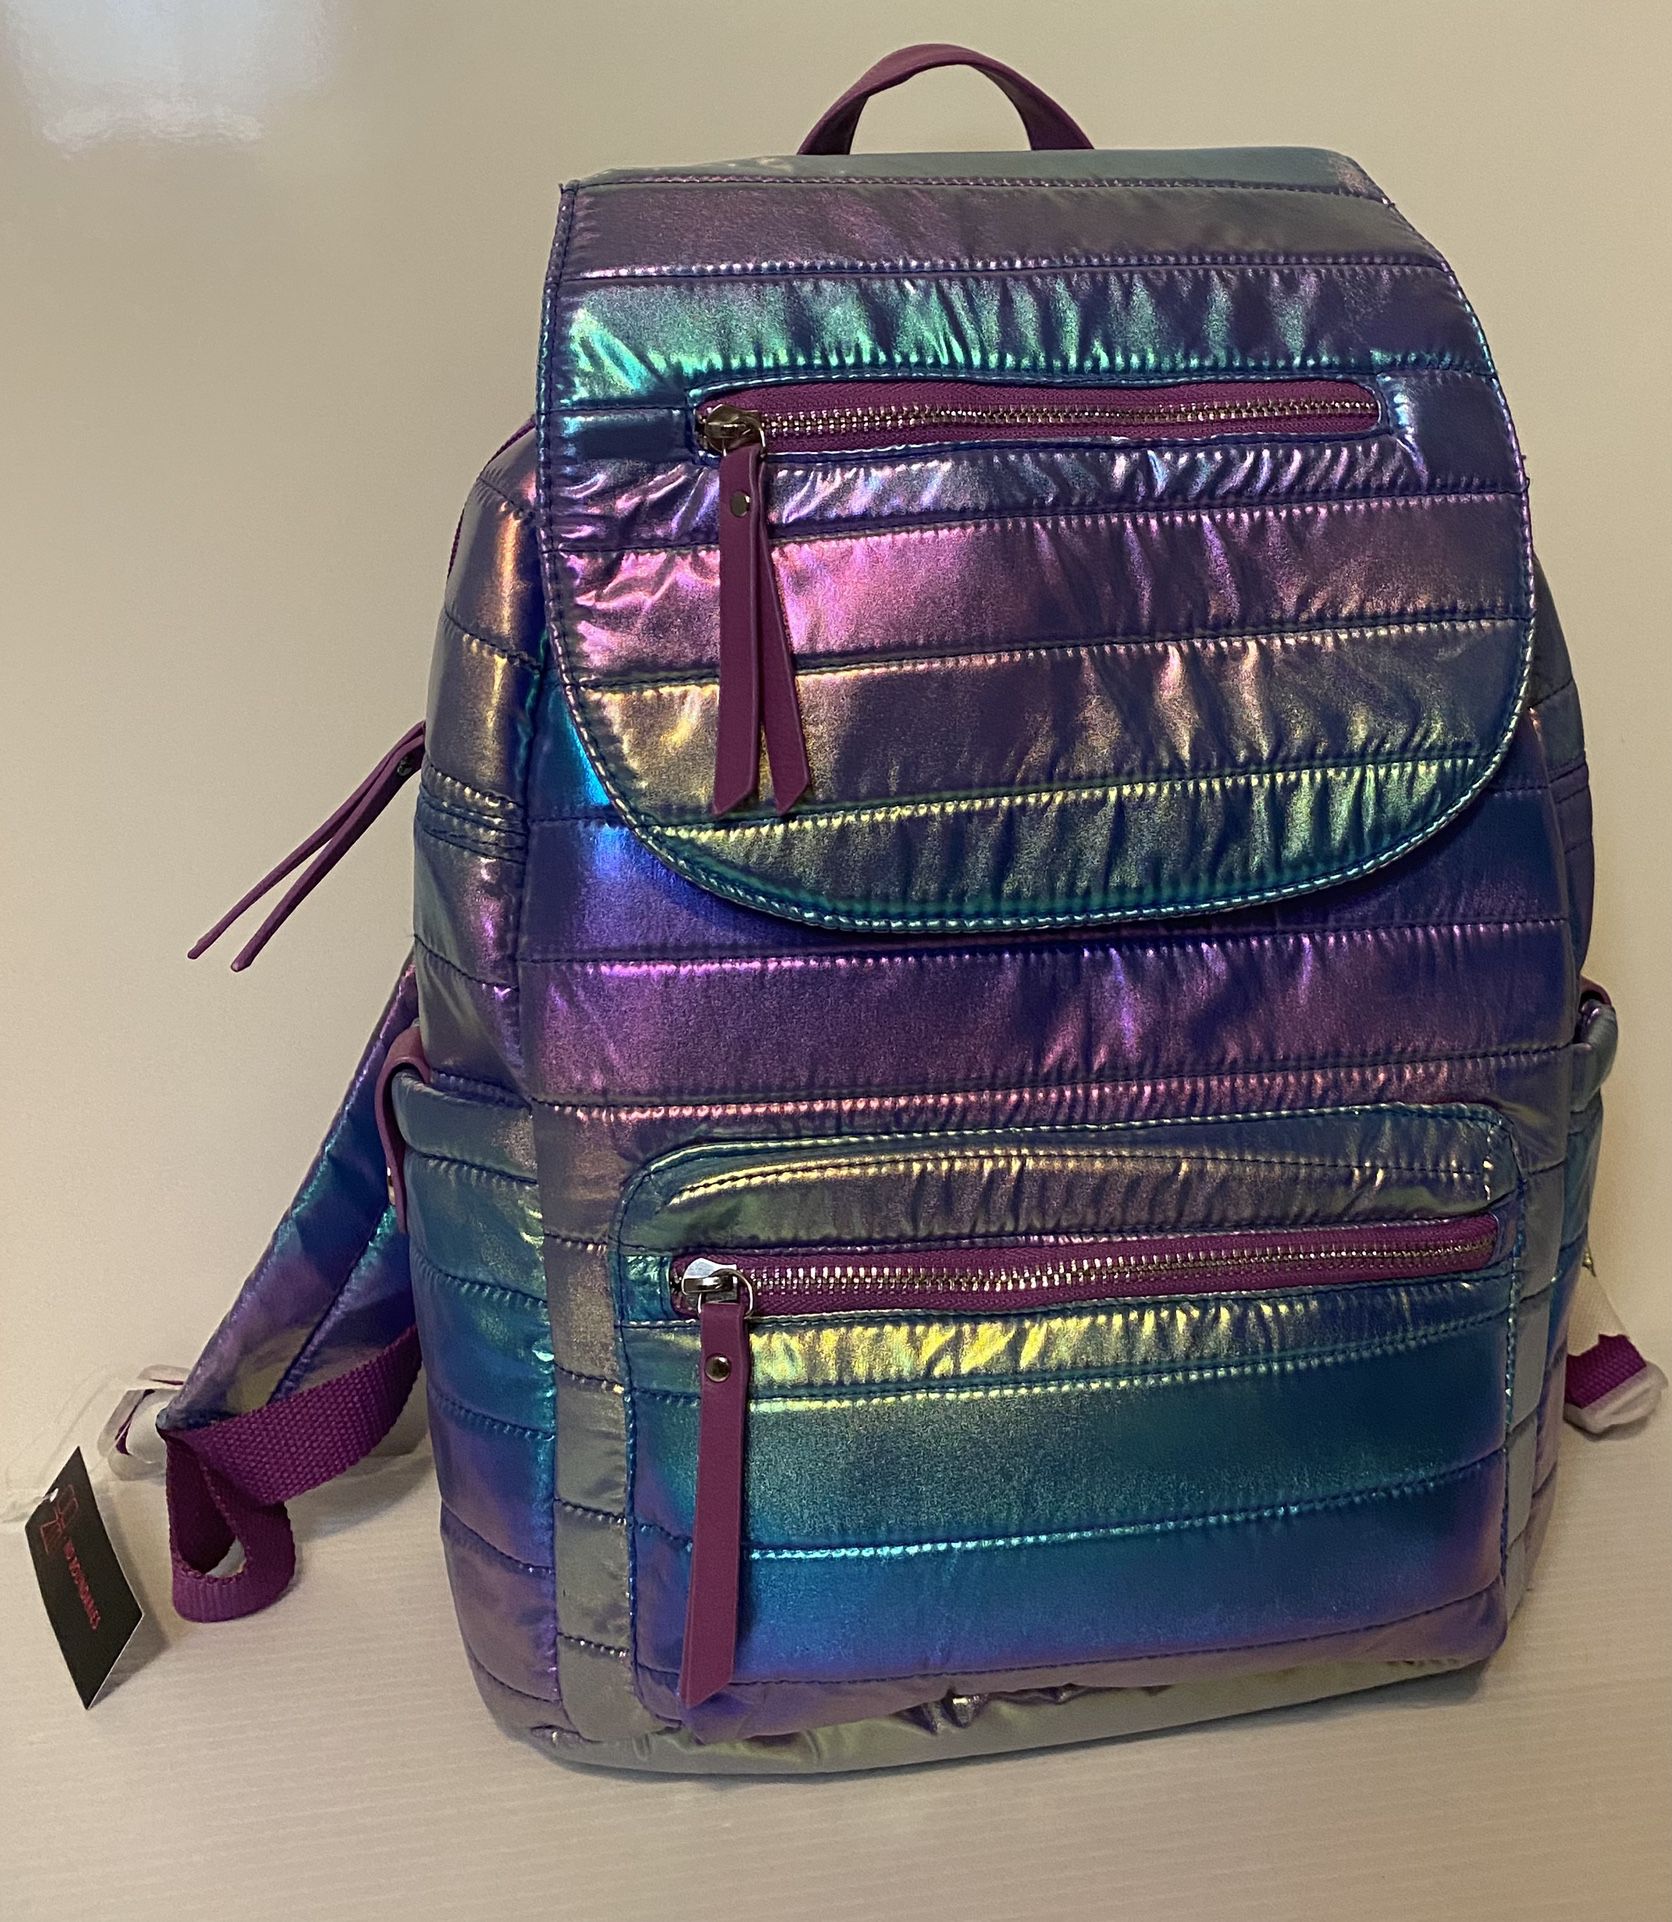 Great NEW Girls Backpack!   24.88$ Retail